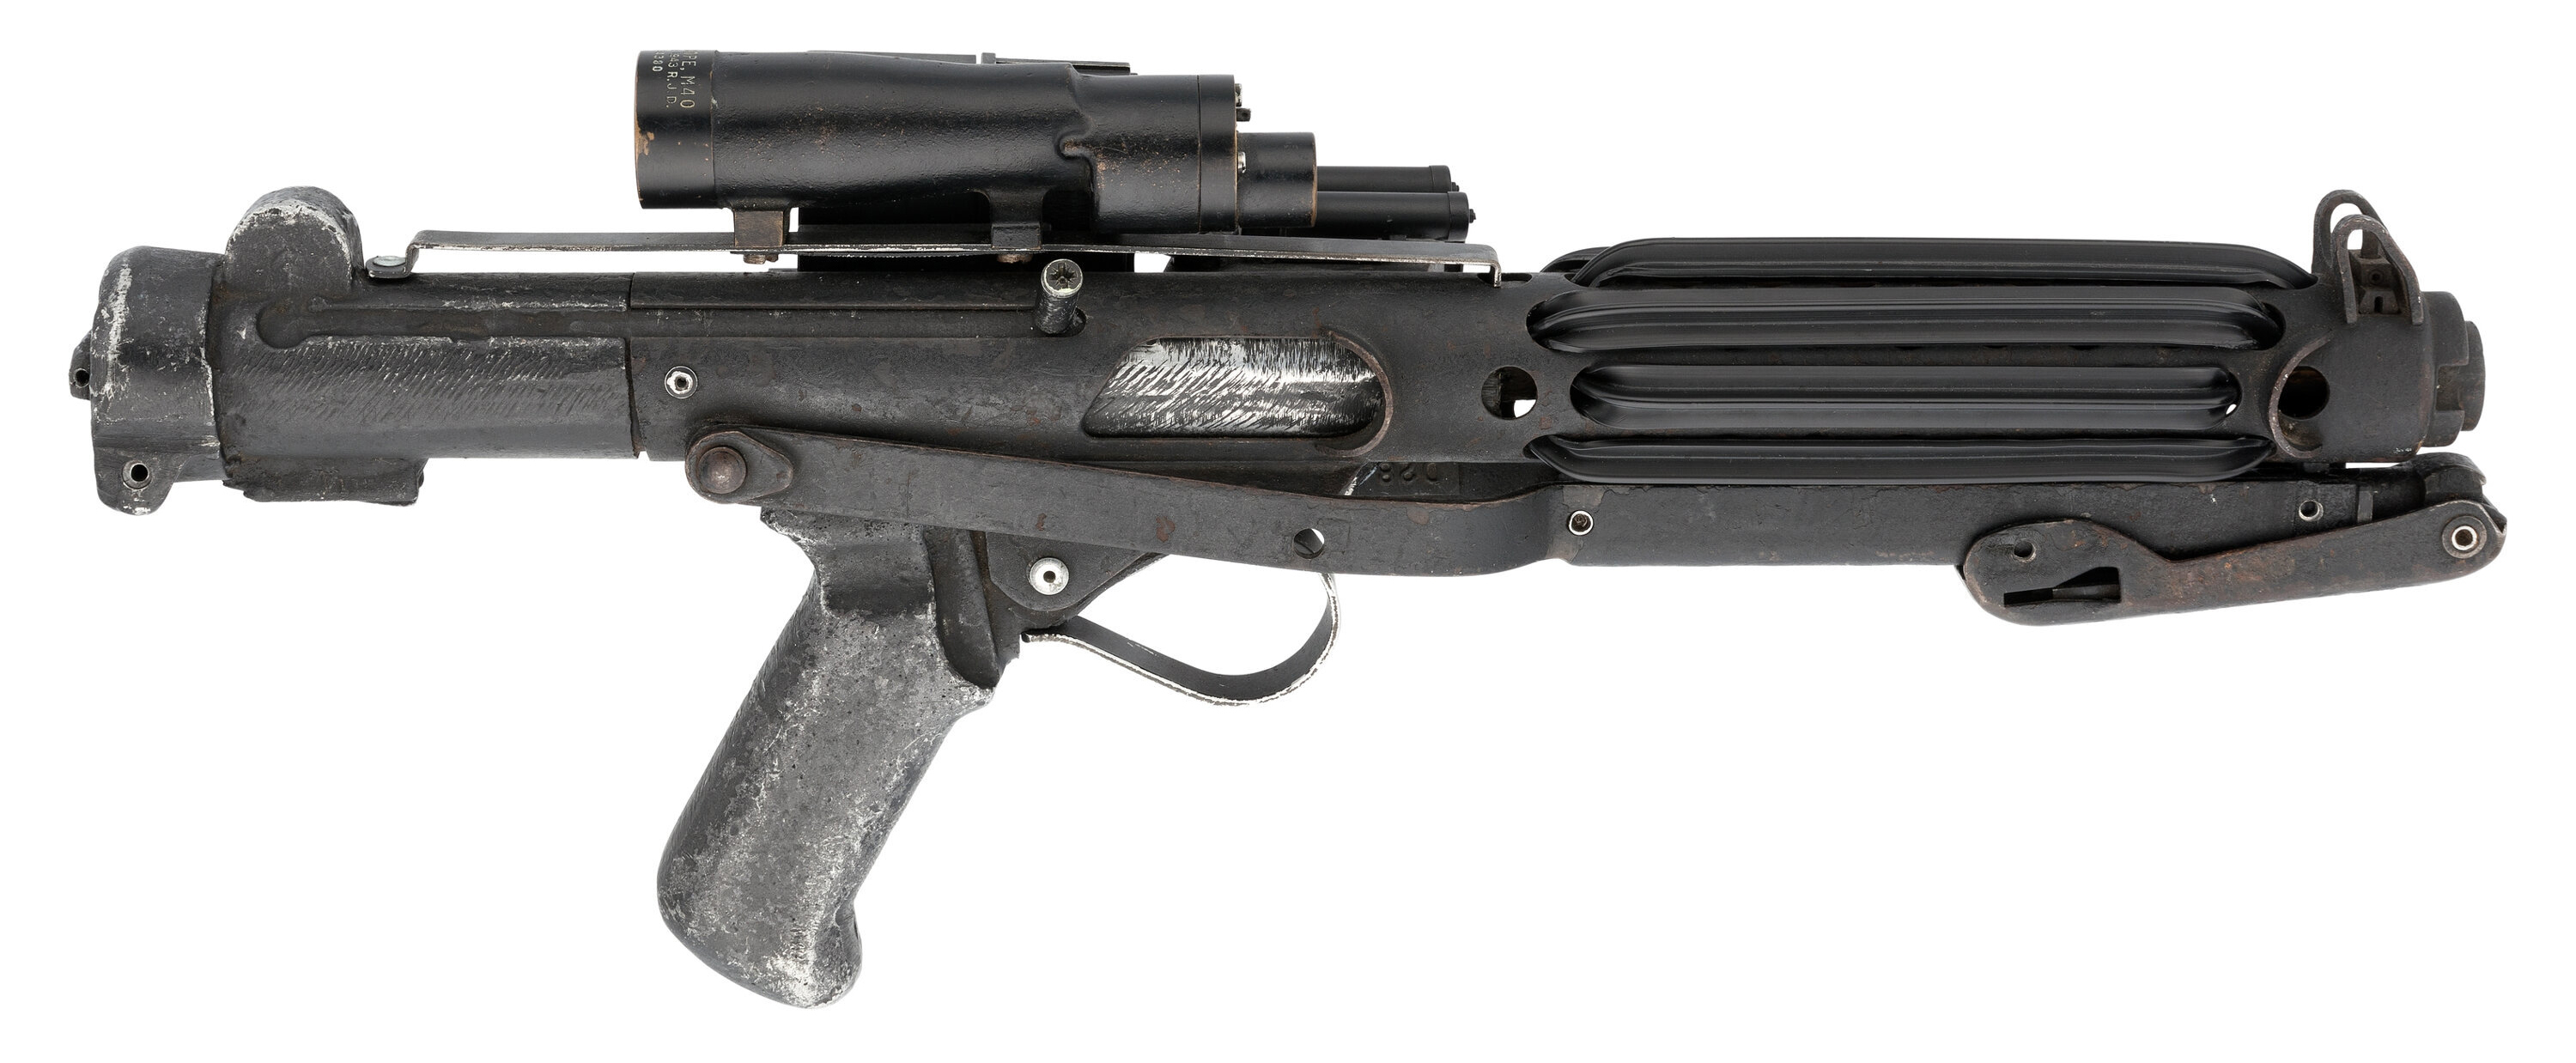 Hero prop E-11 blaster from ‘Star Wars,’ $47,500. Image courtesy of Heritage Auctions